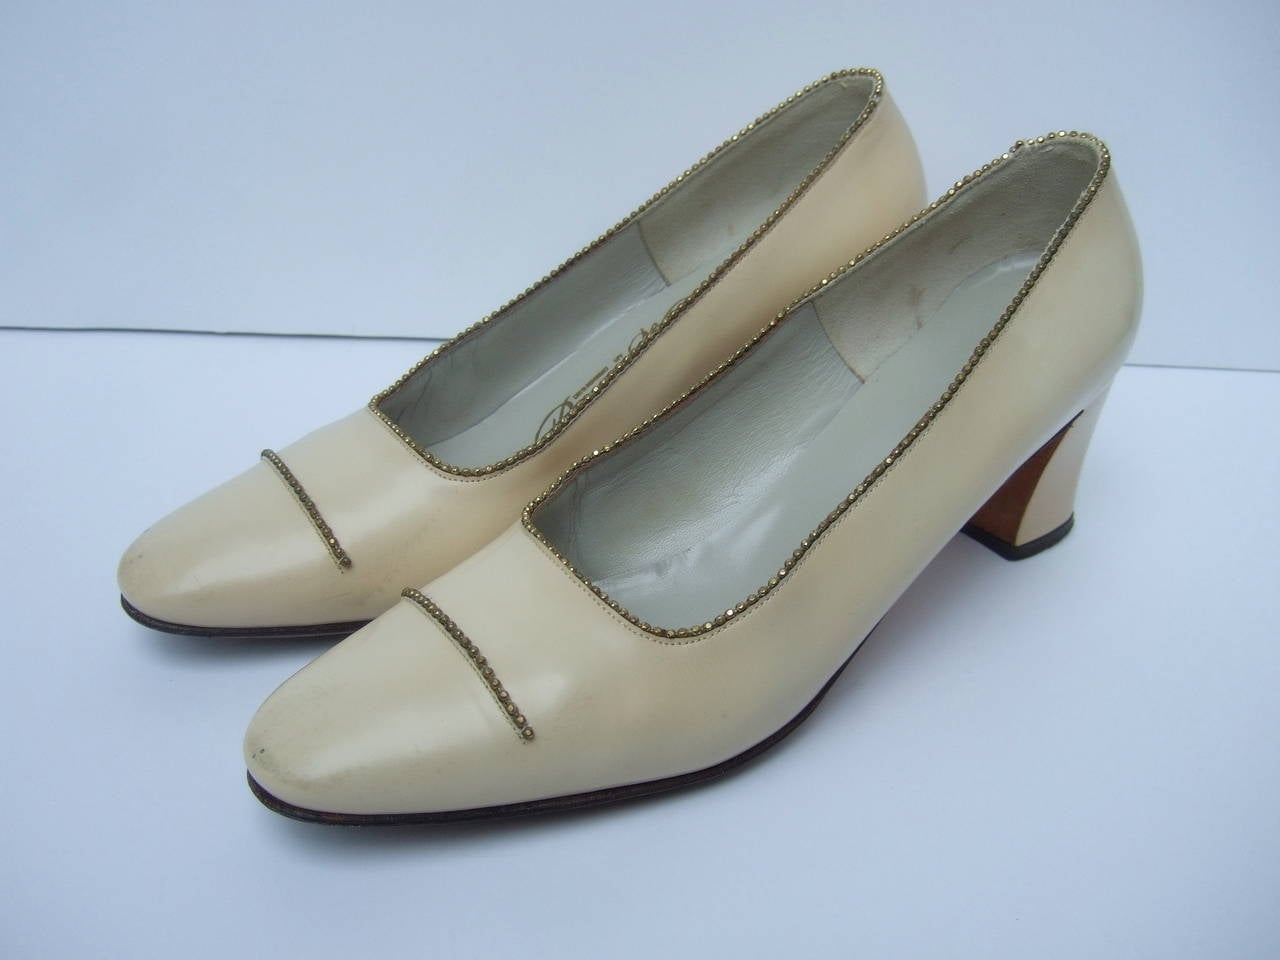 Roger Vivier Paris Ivory Leather Beaded Pumps c 1970 In Good Condition For Sale In University City, MO